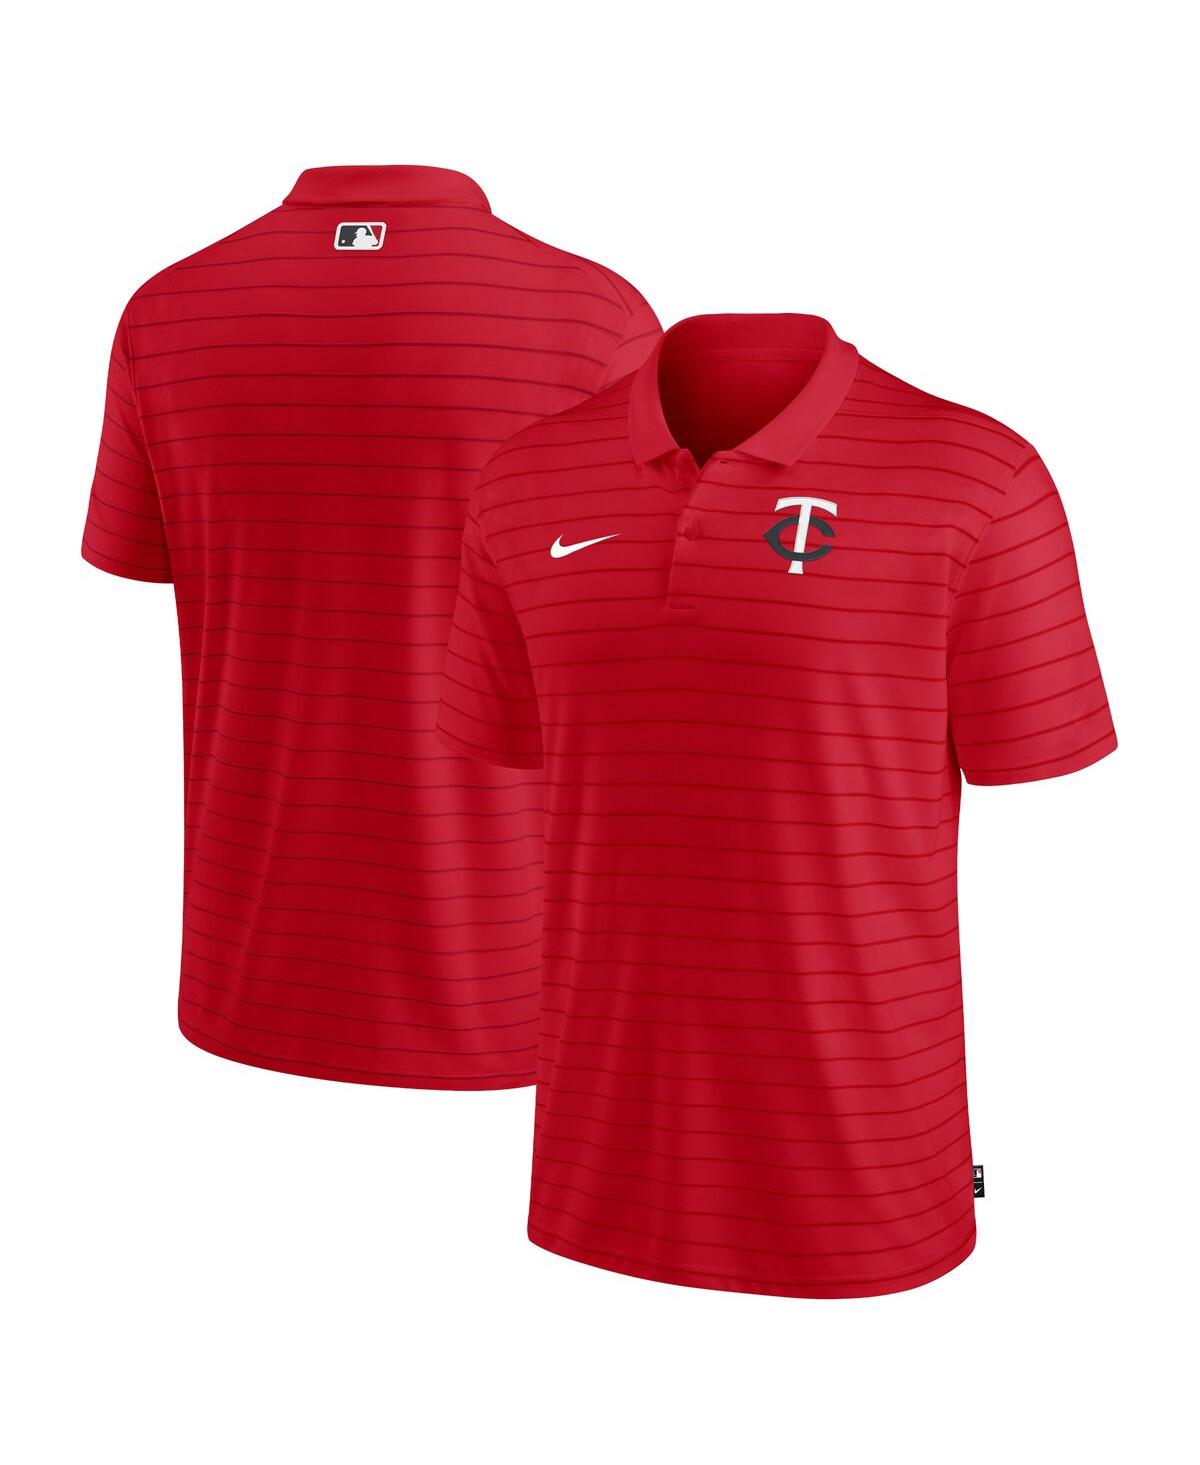 Men's Nike Minnesota Twins Red Authentic Collection Victory Striped Performance Polo Shirt - Red